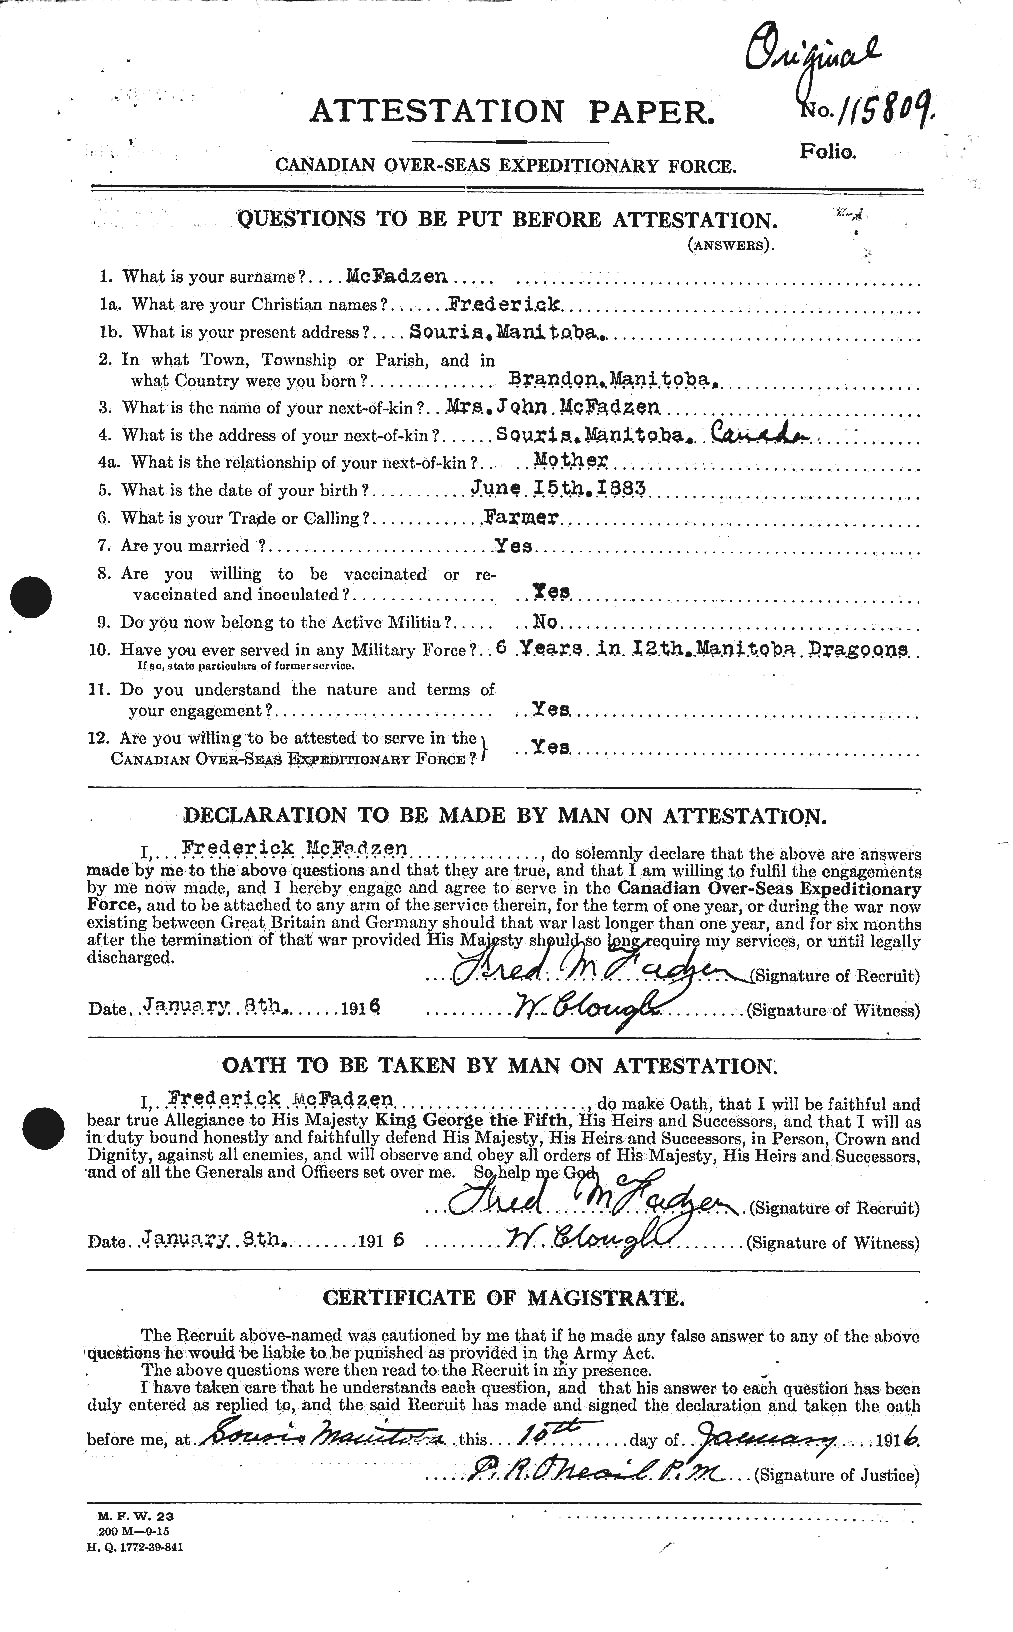 Personnel Records of the First World War - CEF 521230a